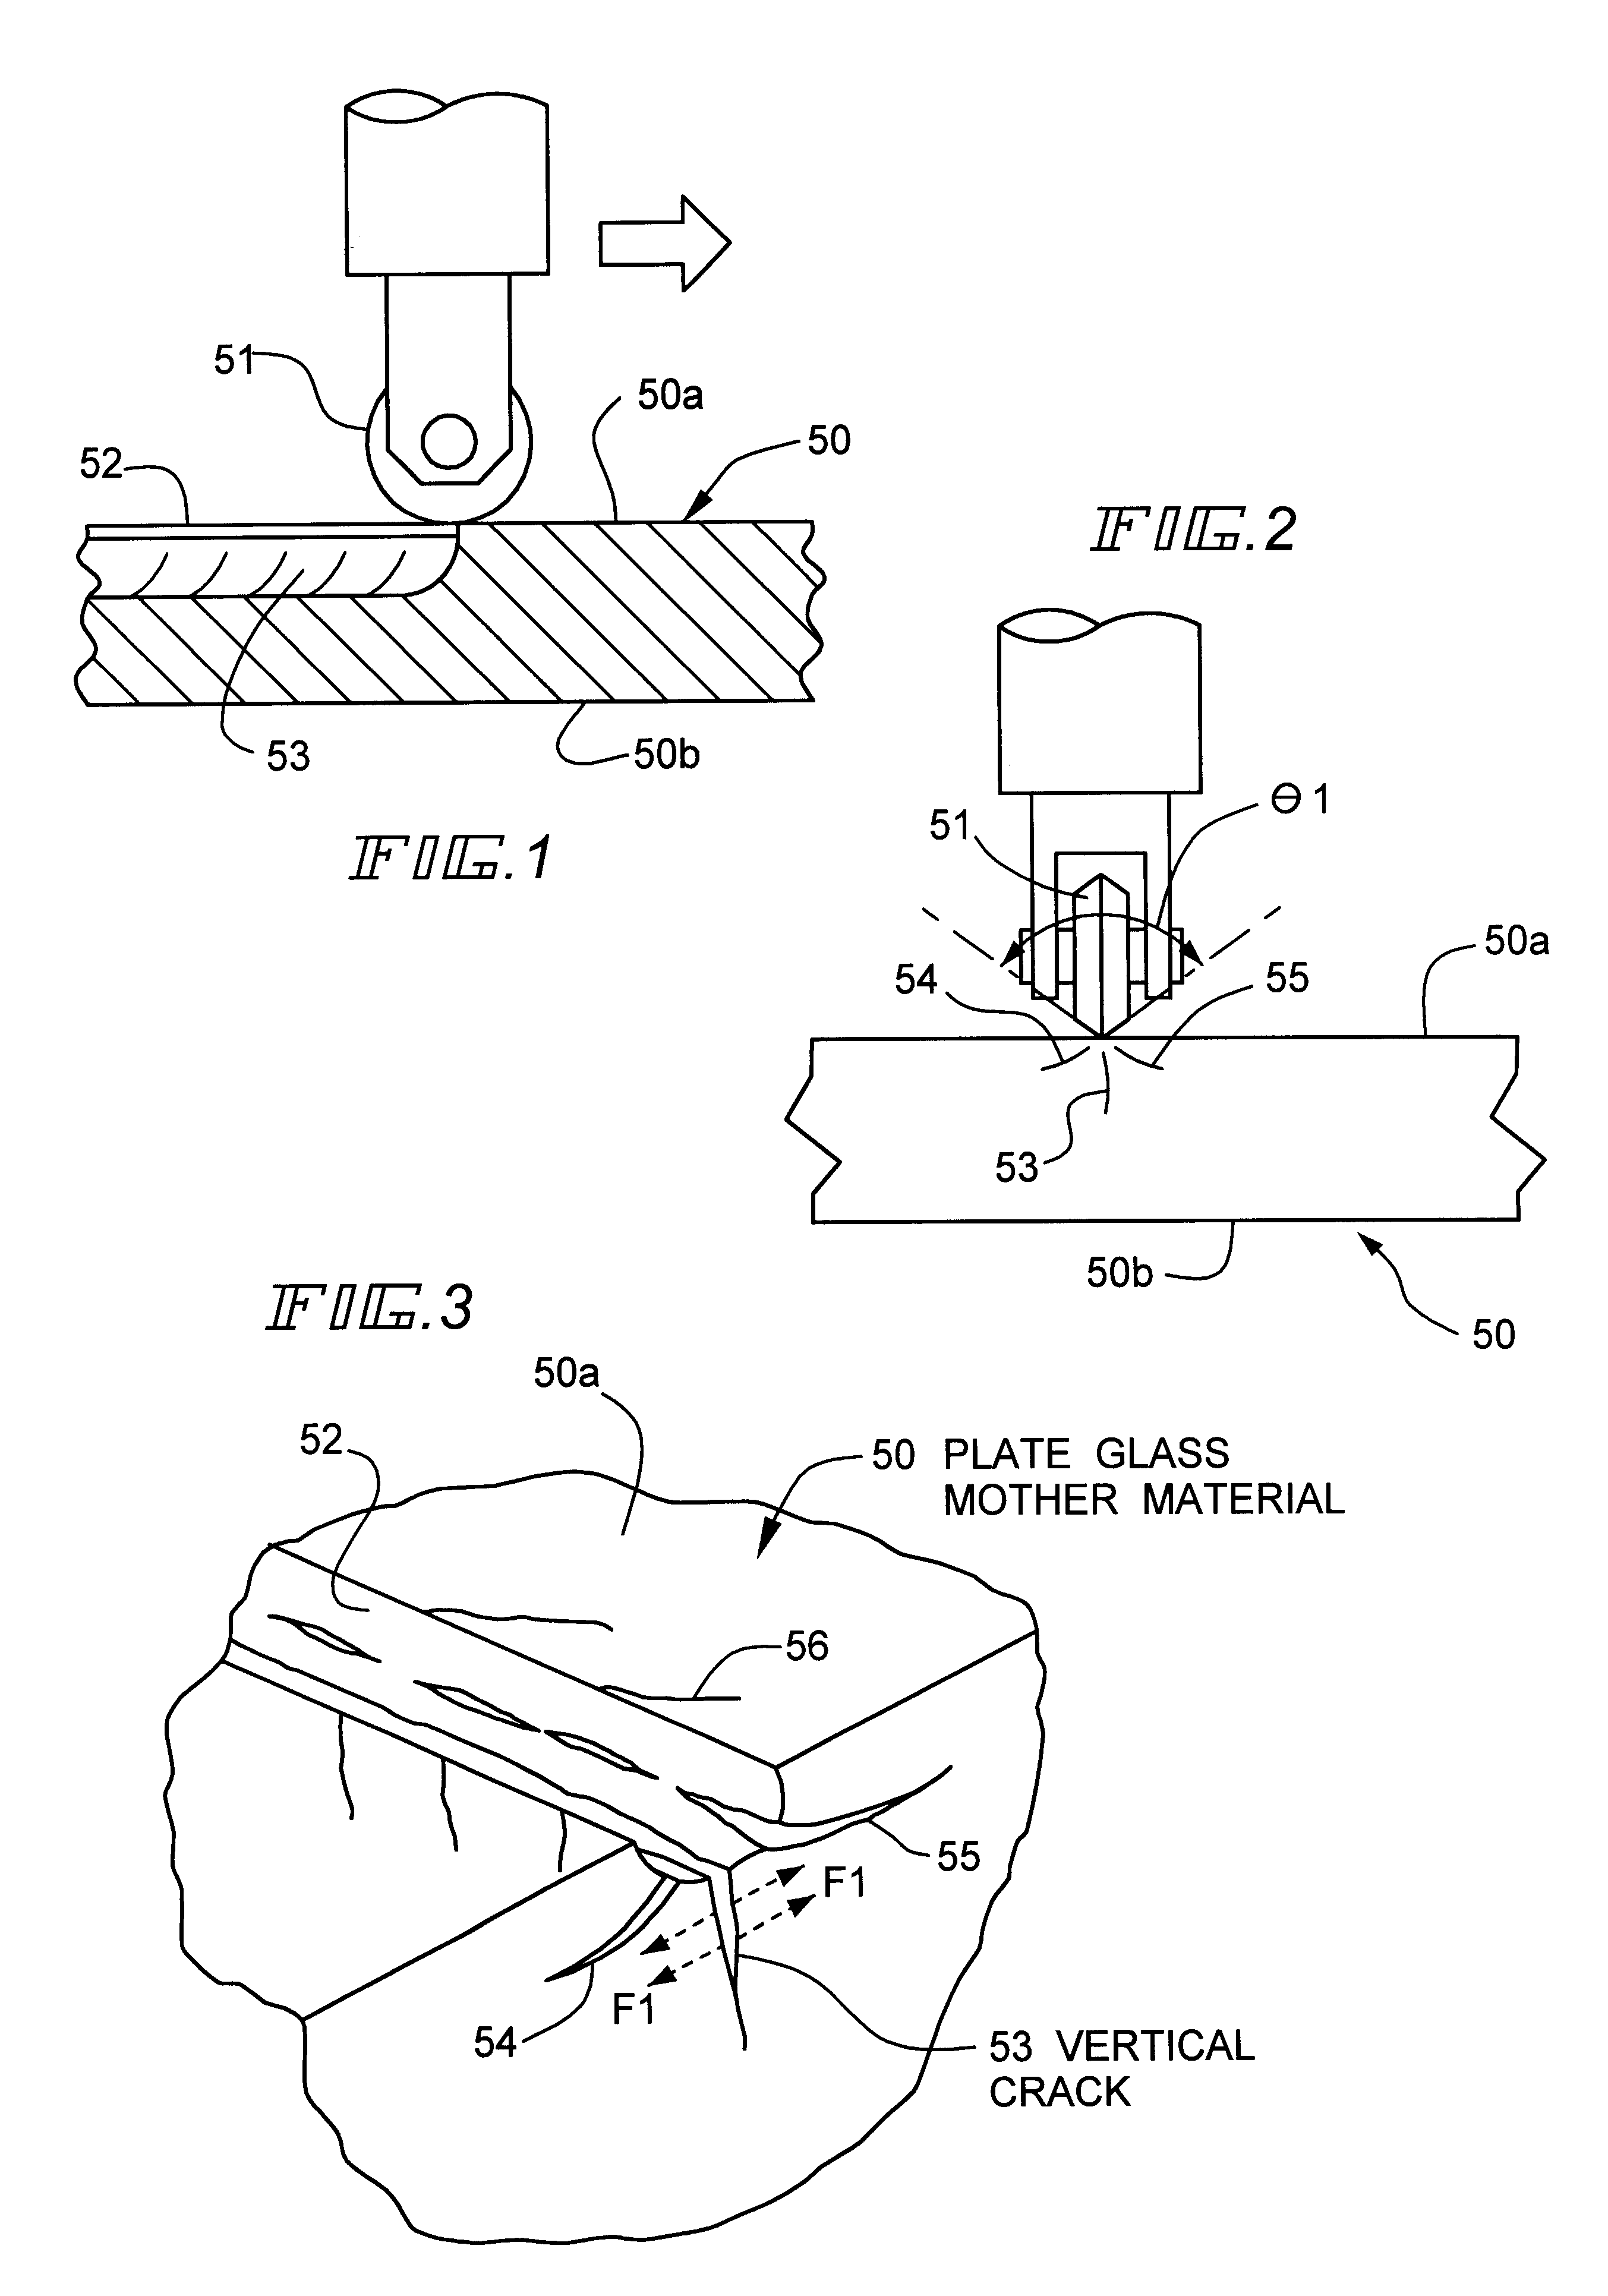 Cutting method for plate glass mother material